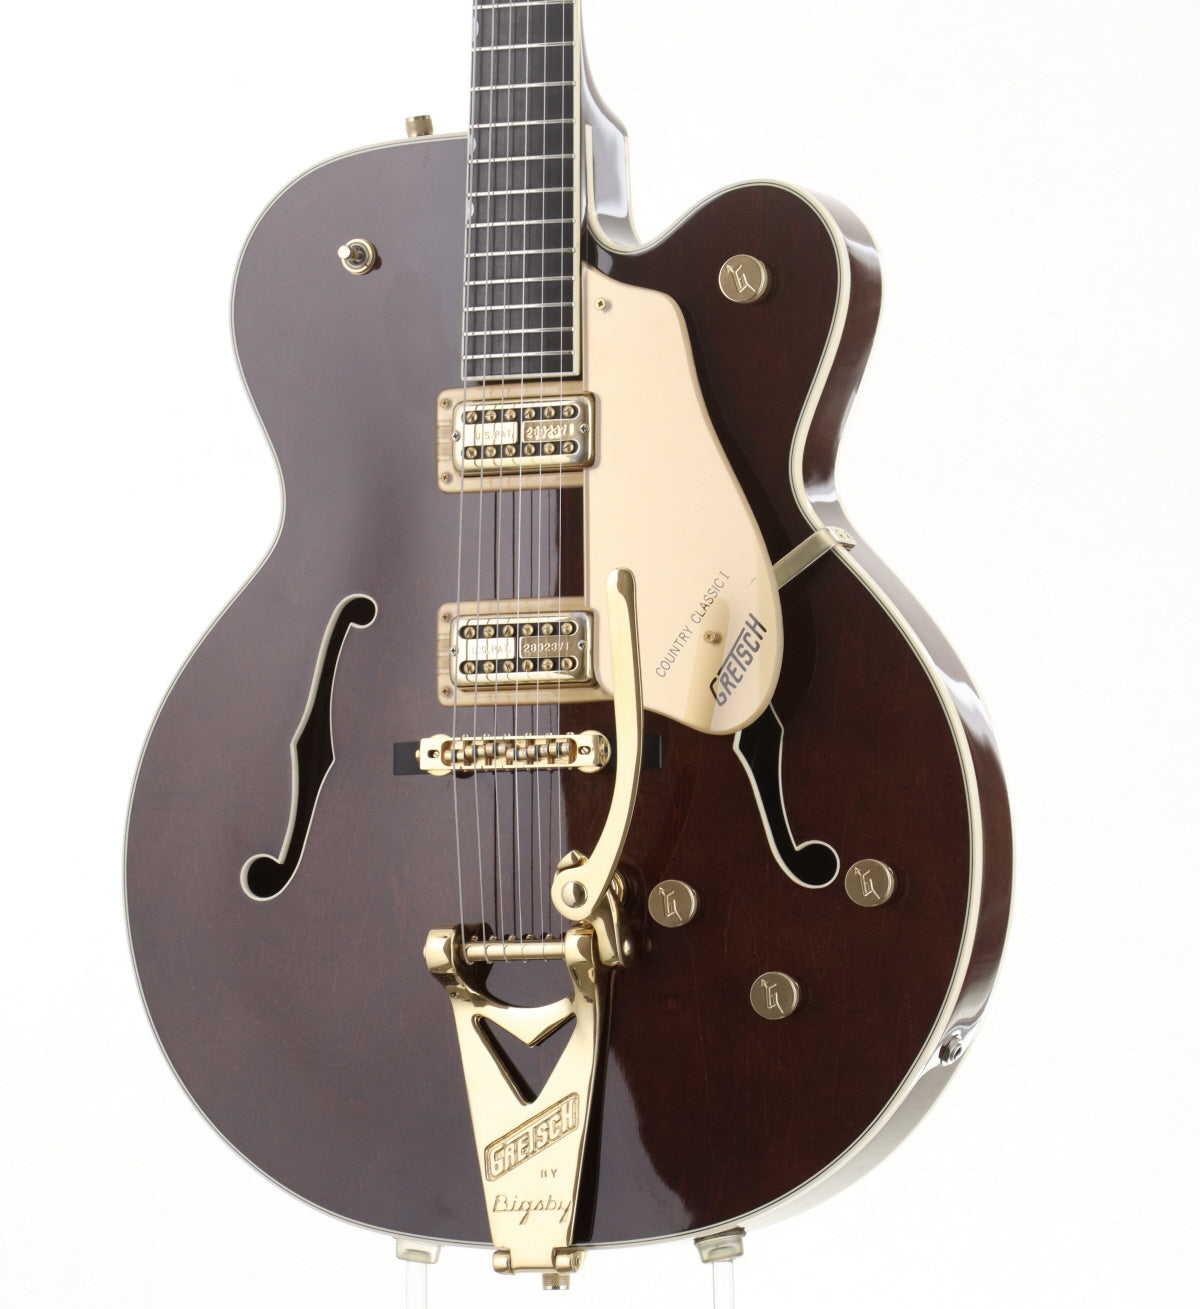 [SN 994122-478] USED GRETSCH / 6122S Country Classic I [03]